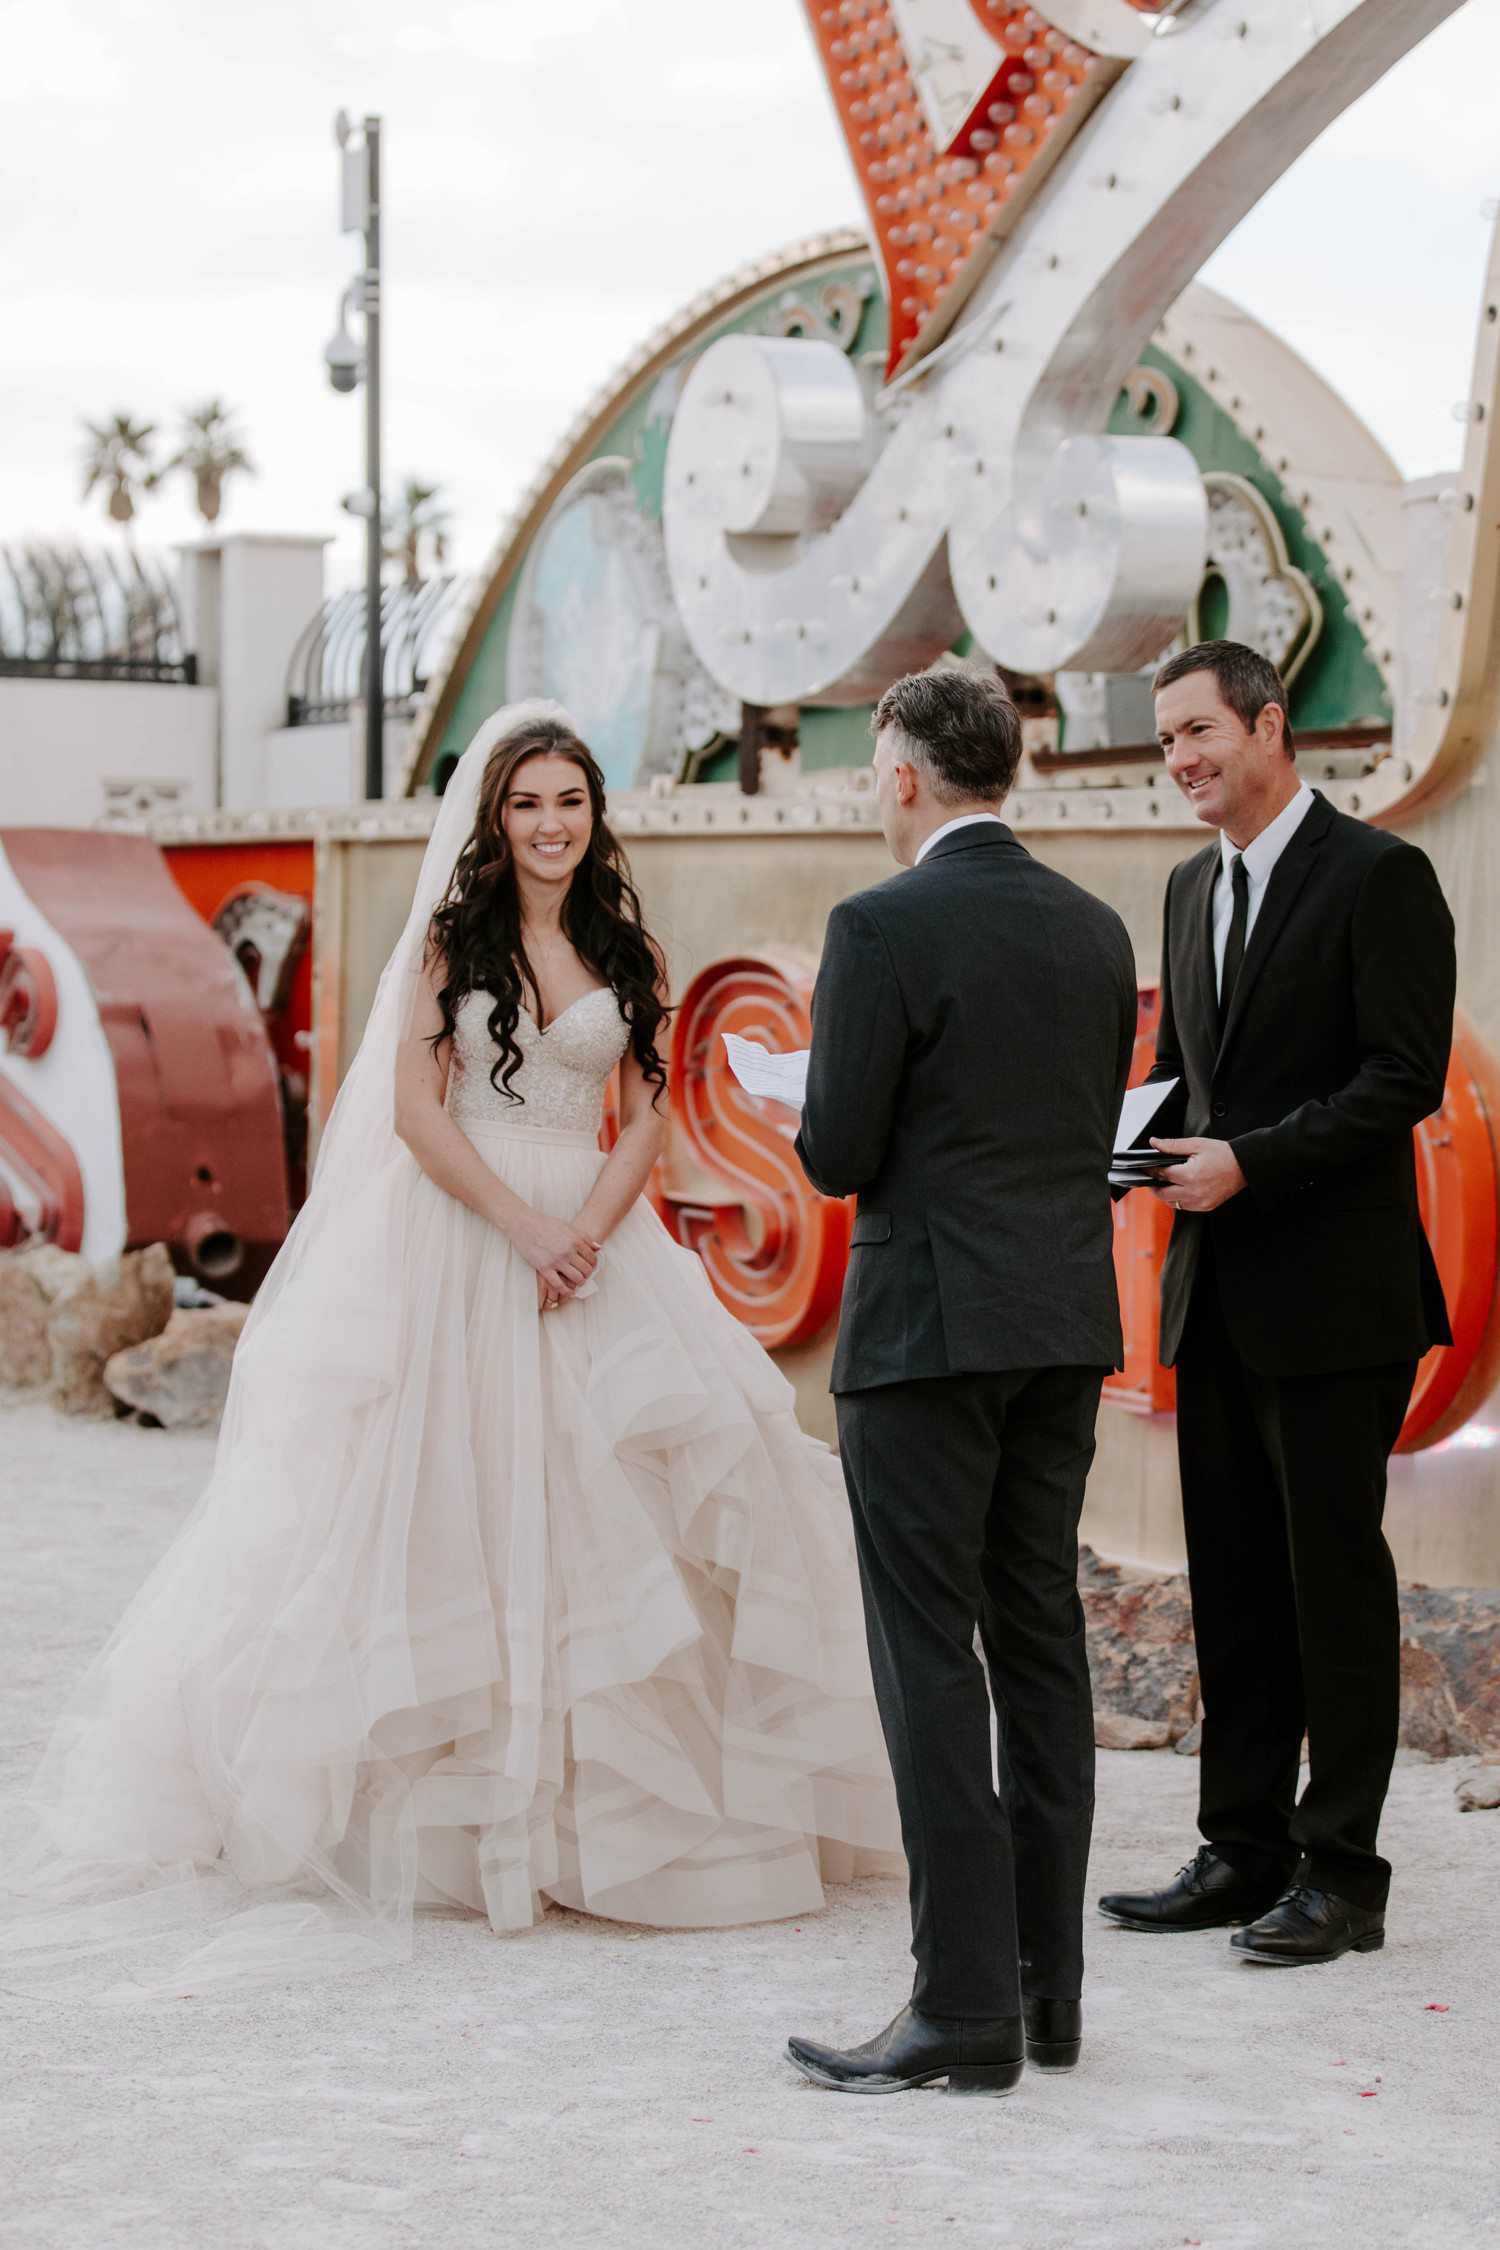 Wedding Ceremony at The Neon Museum